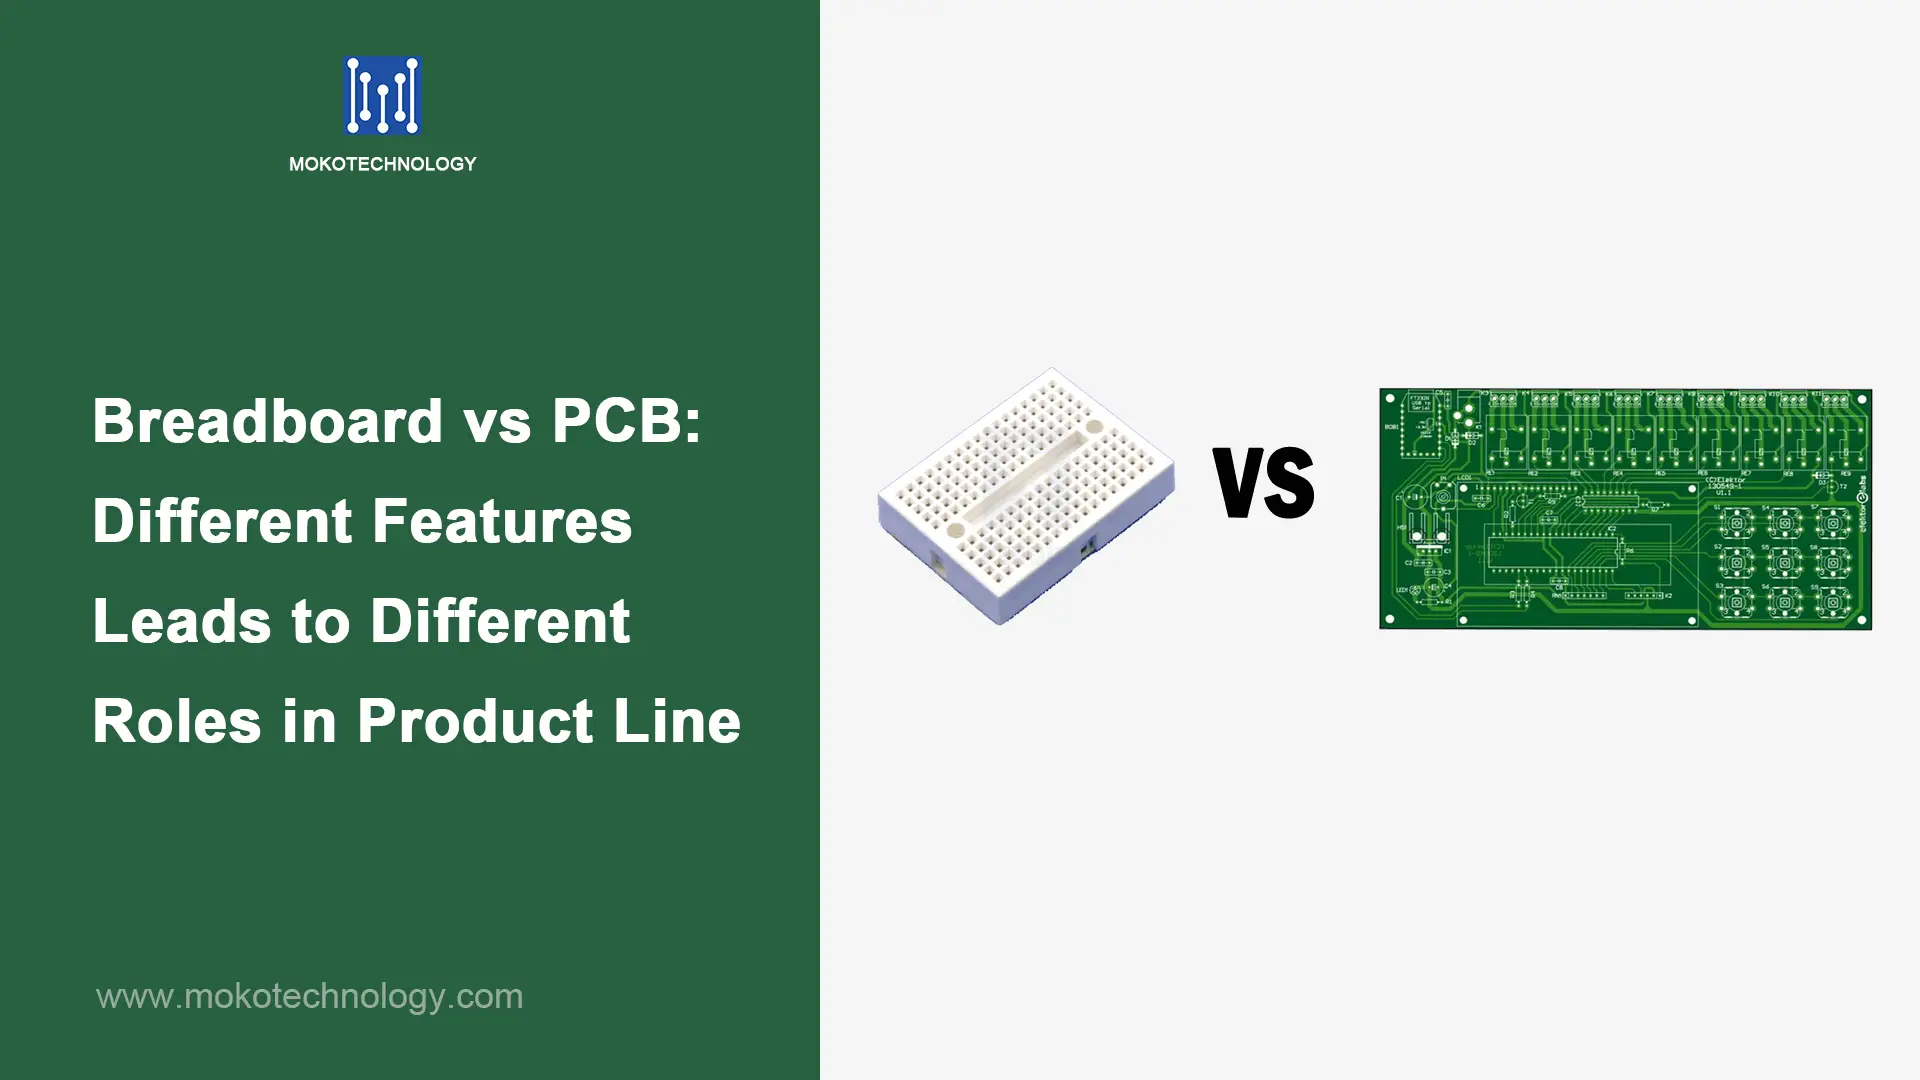 Breadboard vs PCB Different Features Lead to Different Roles in Product Line